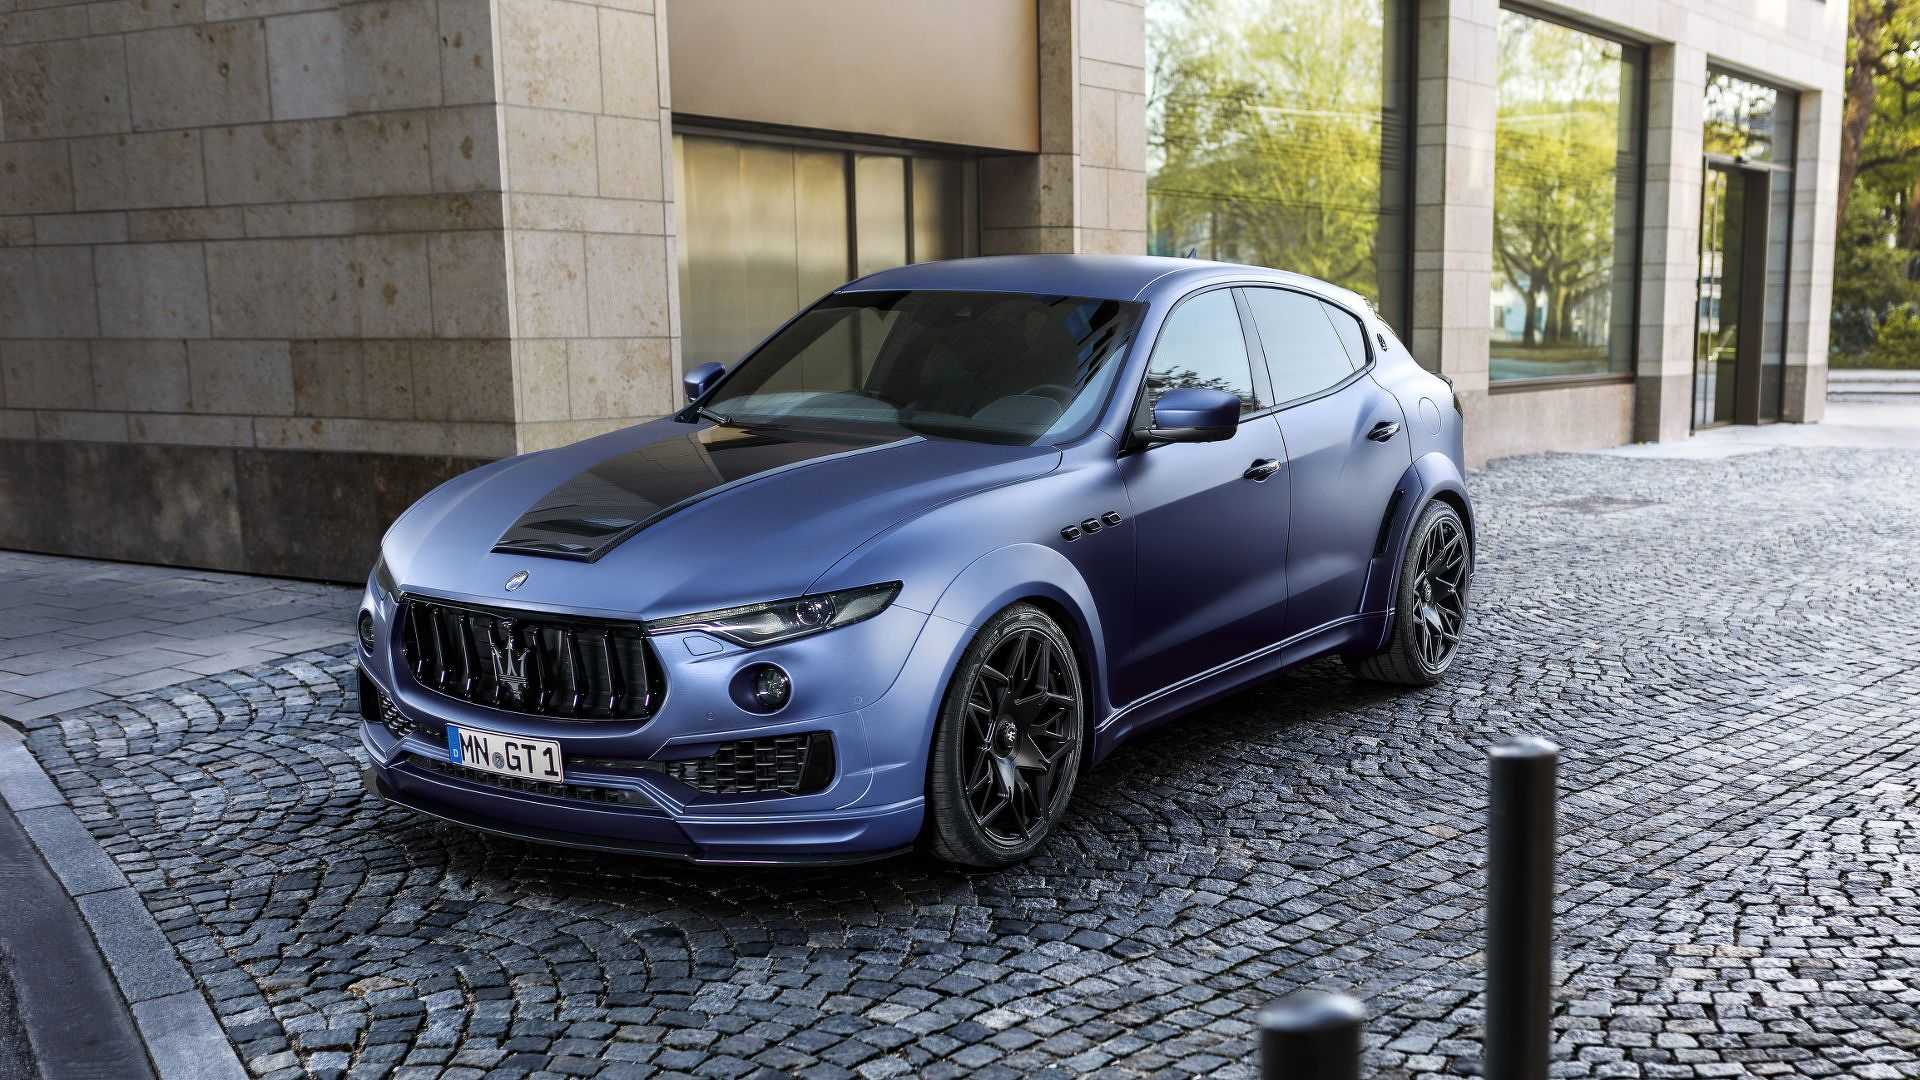 550hp Maserati Levante Gts To Be Launched In India By End Of 2018